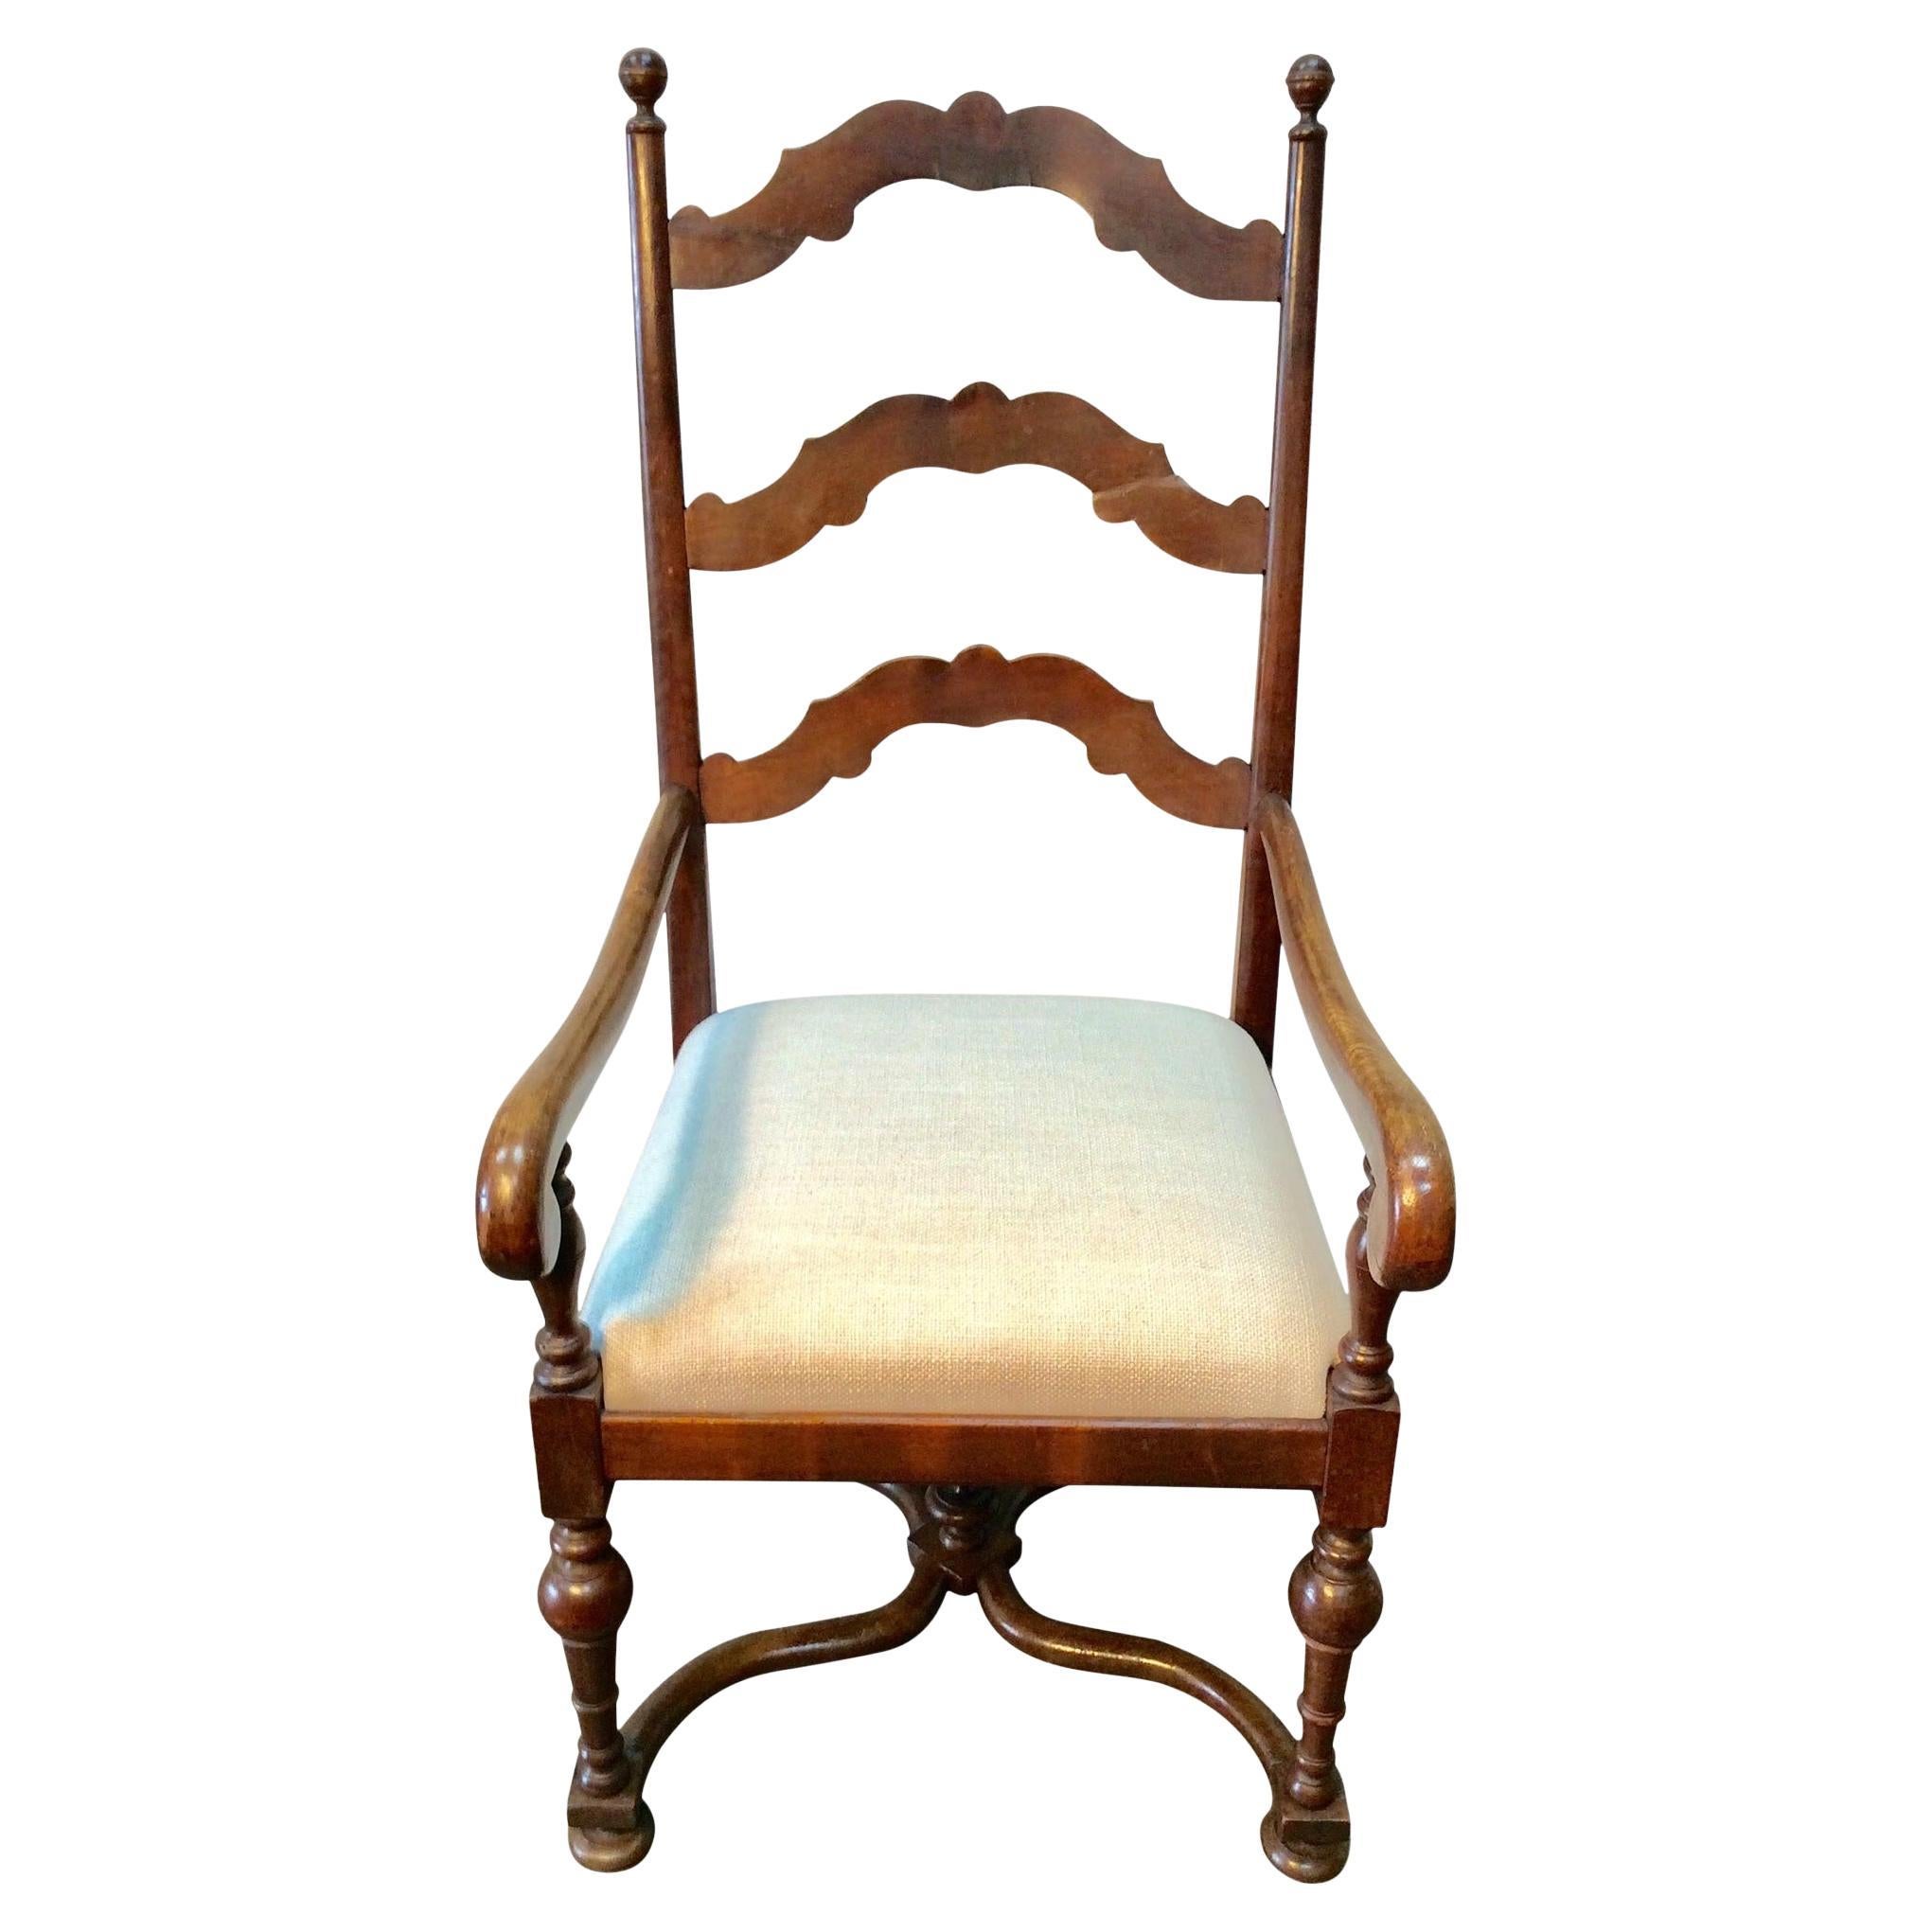 Late 19th Century French Ladderback Armchair